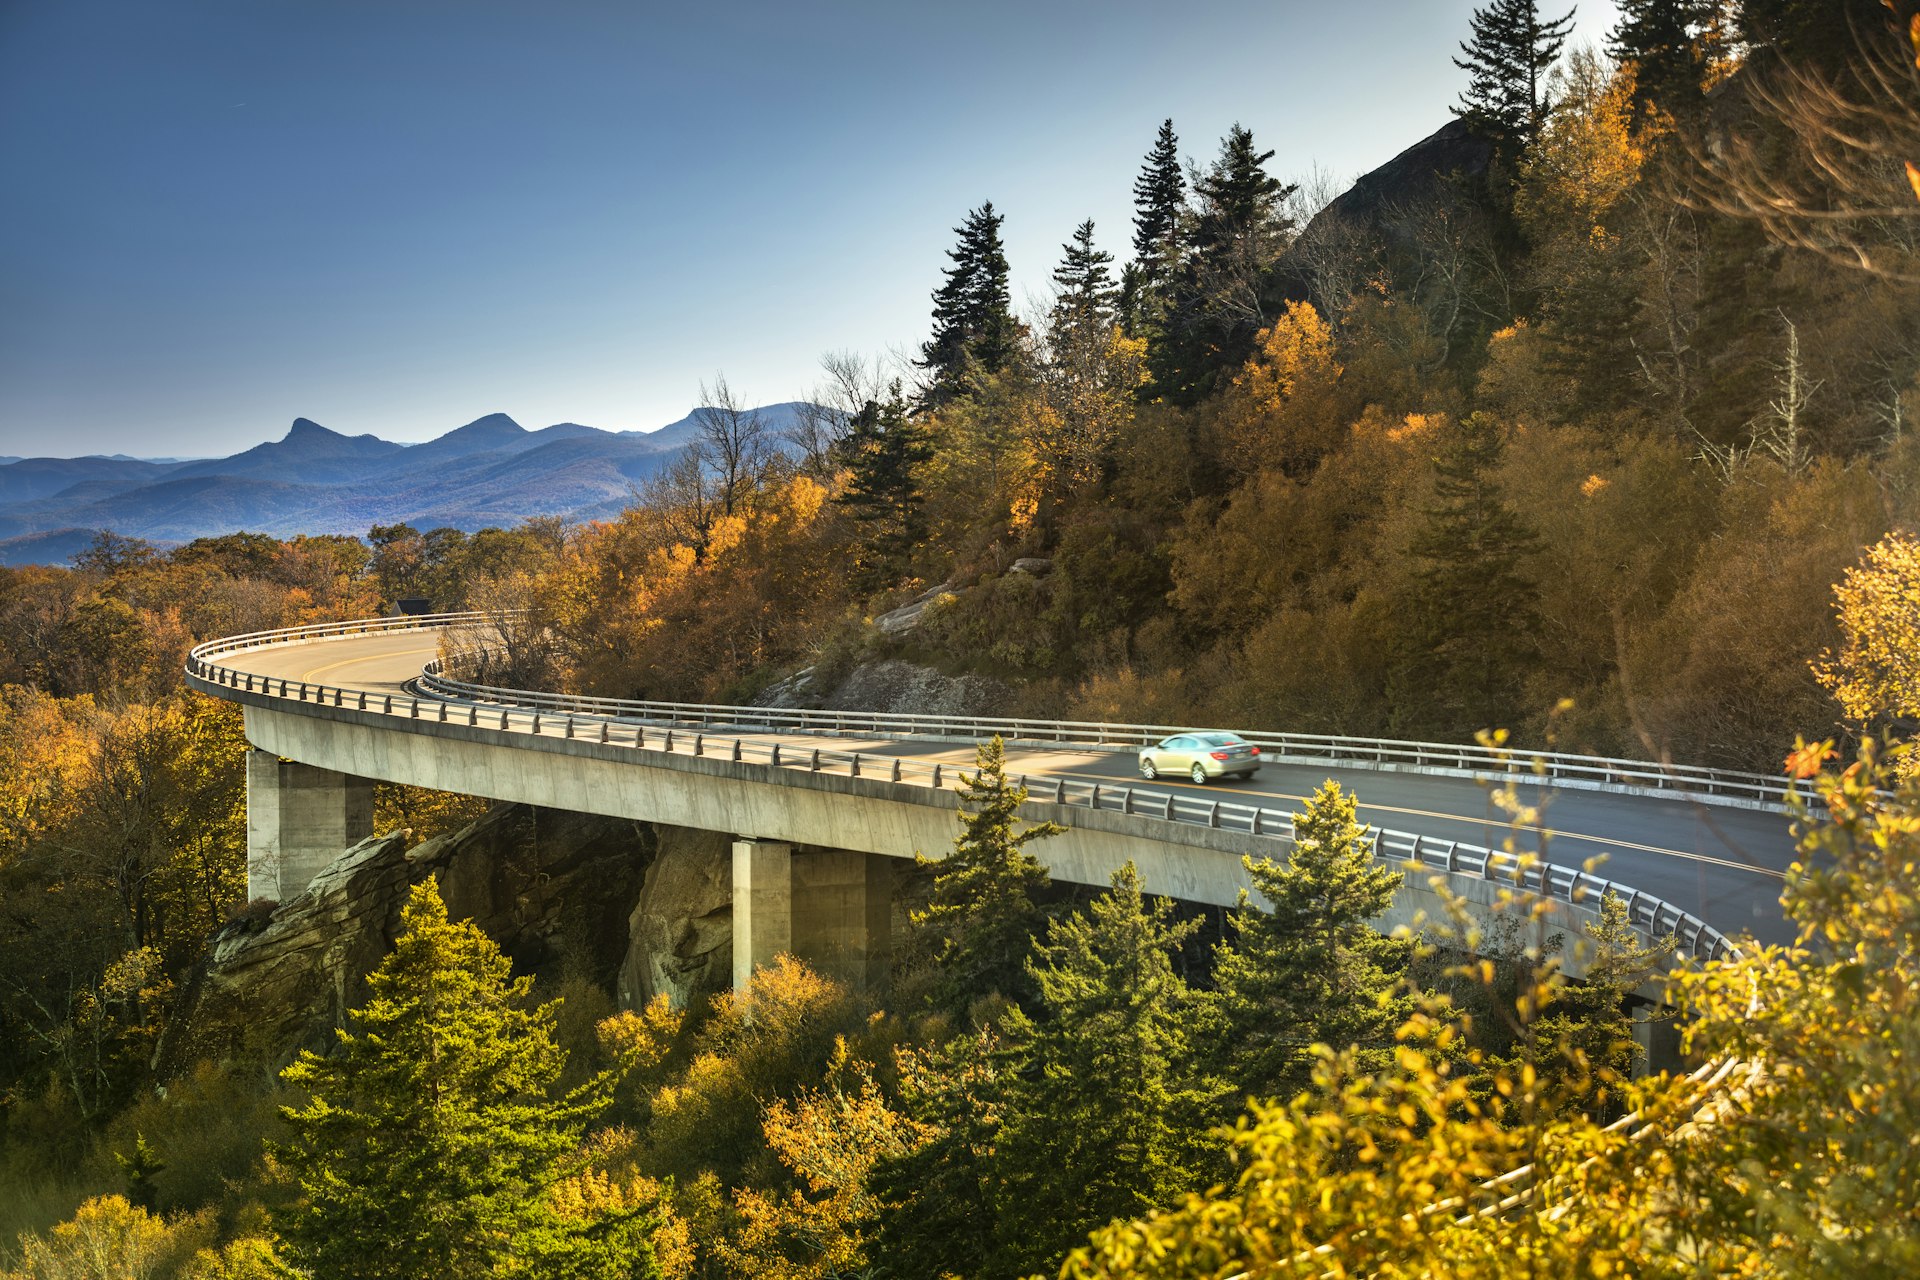 Cars travel on the Linn Cove Viaduct along the Blue Ridge Parkway in fall, North Carolina